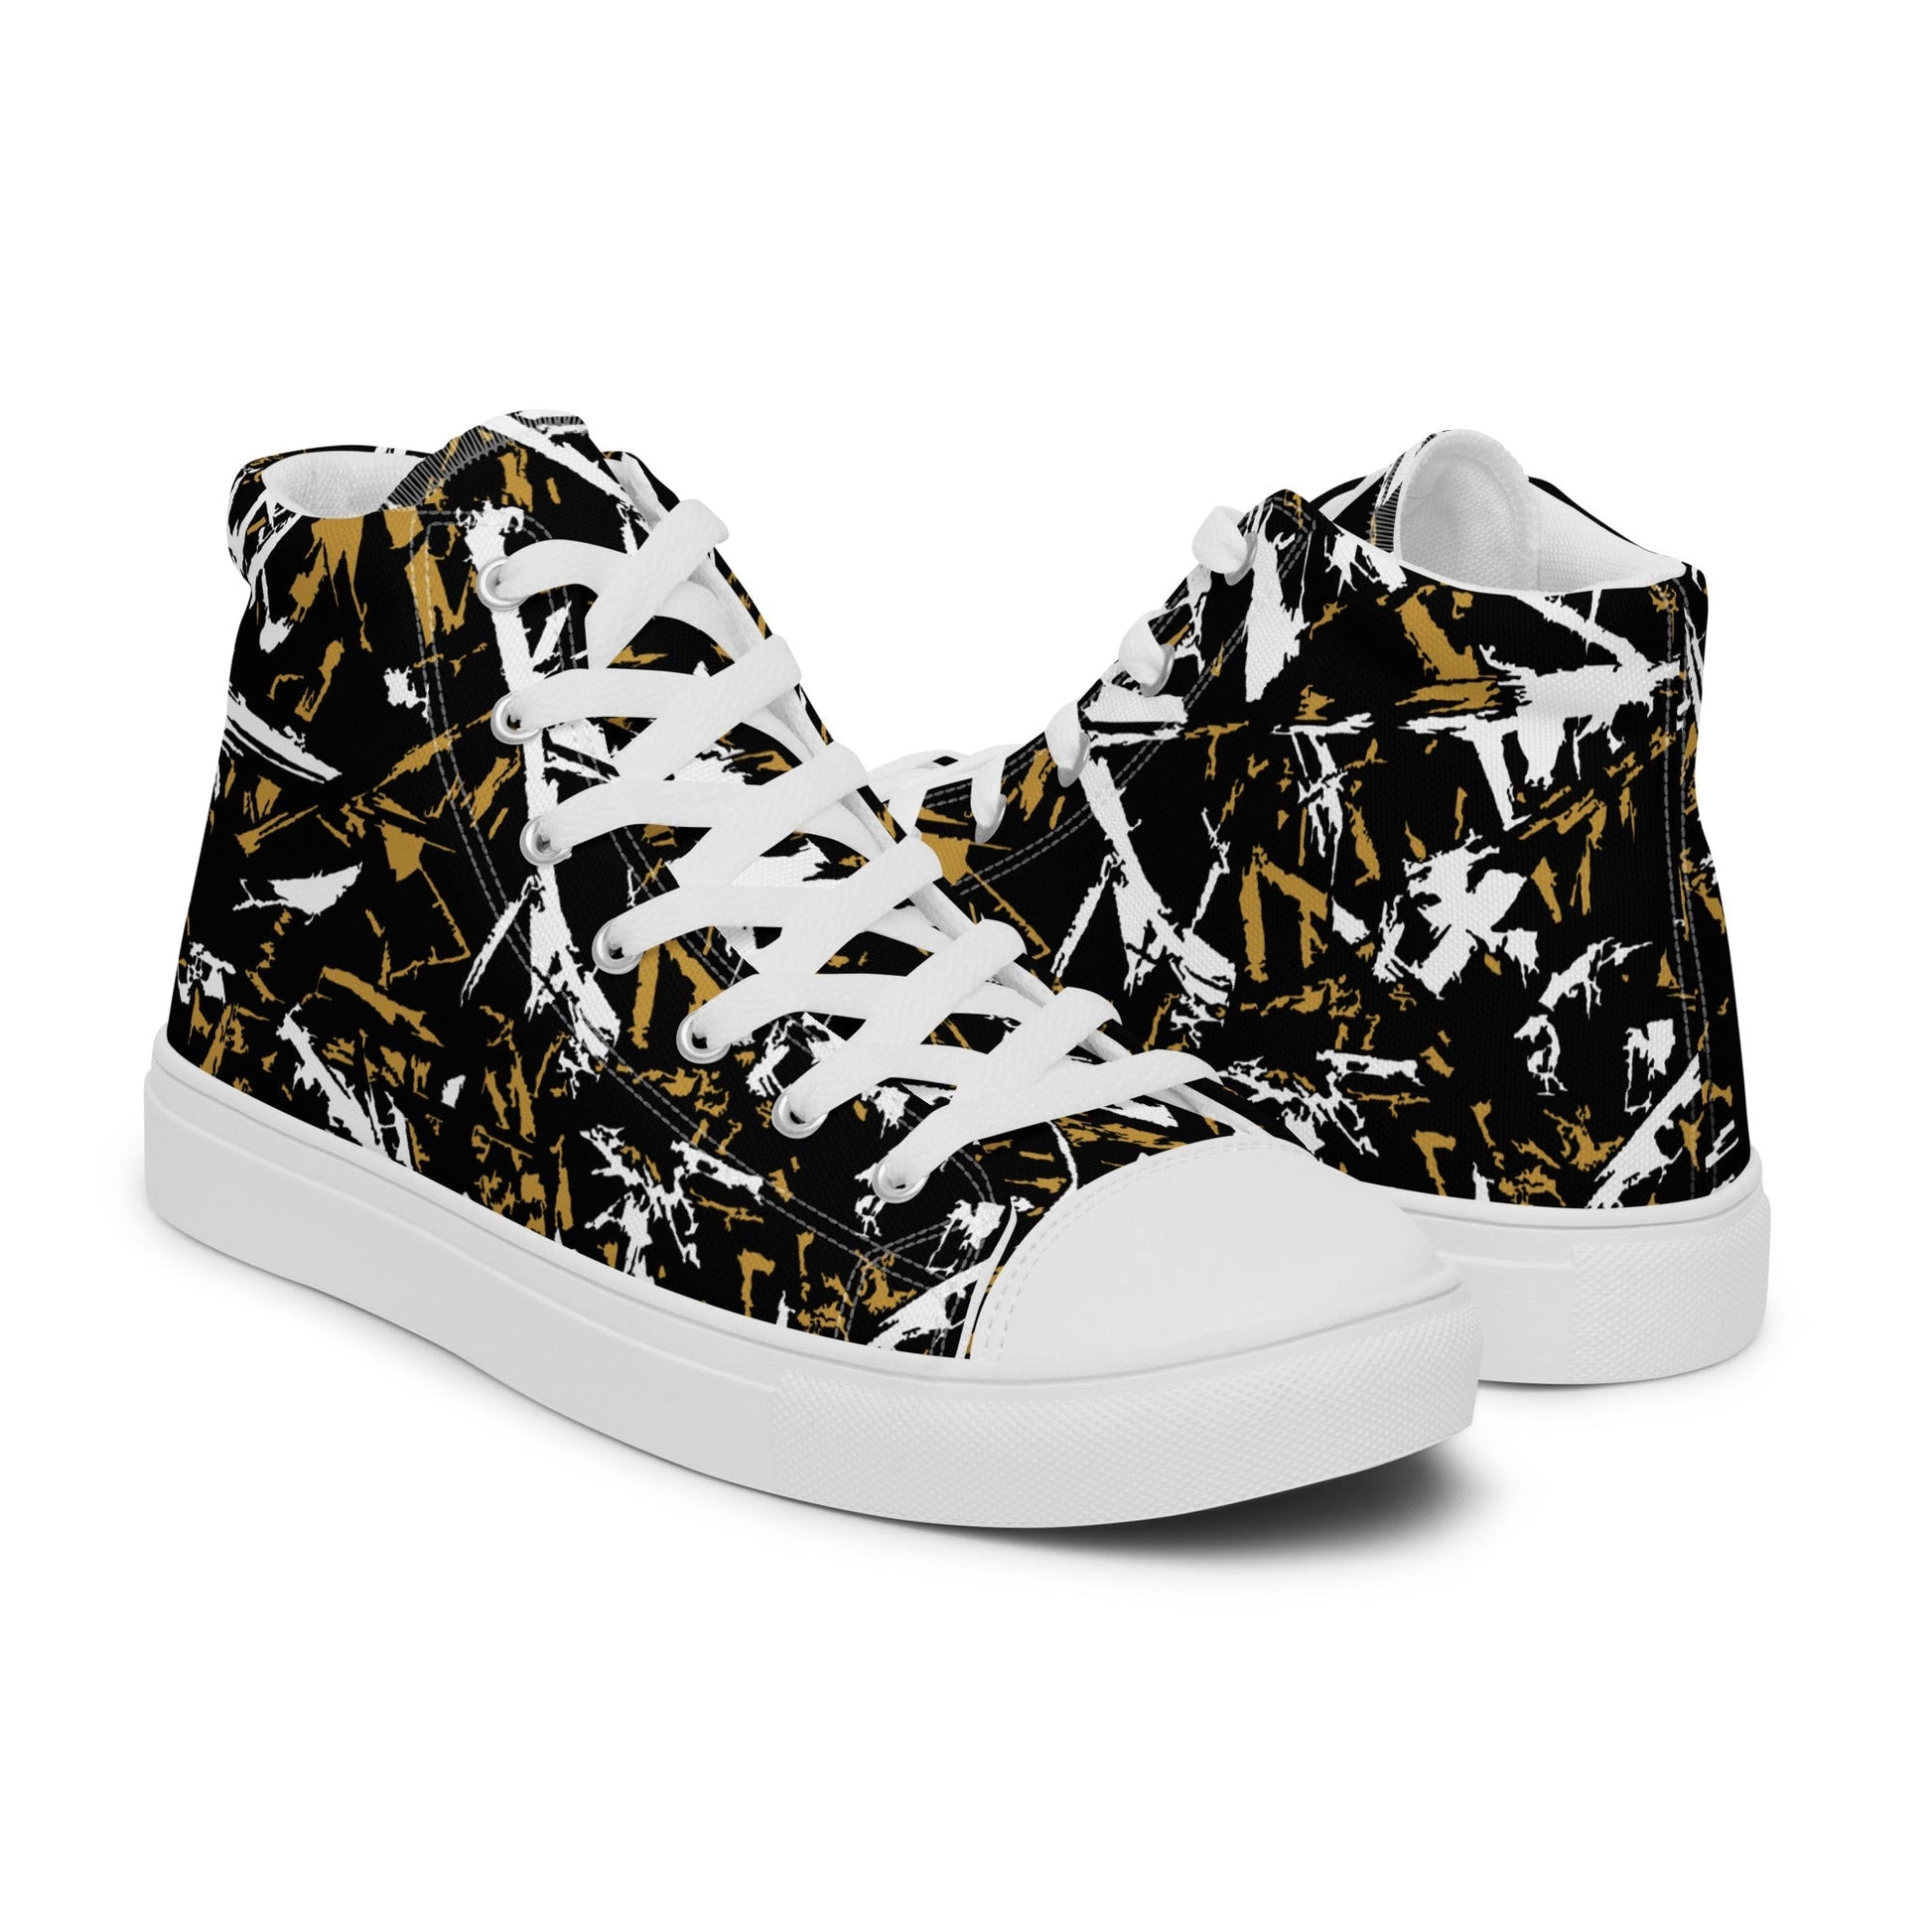 Men’s Forest Sneakers-DoggyLoveandMore